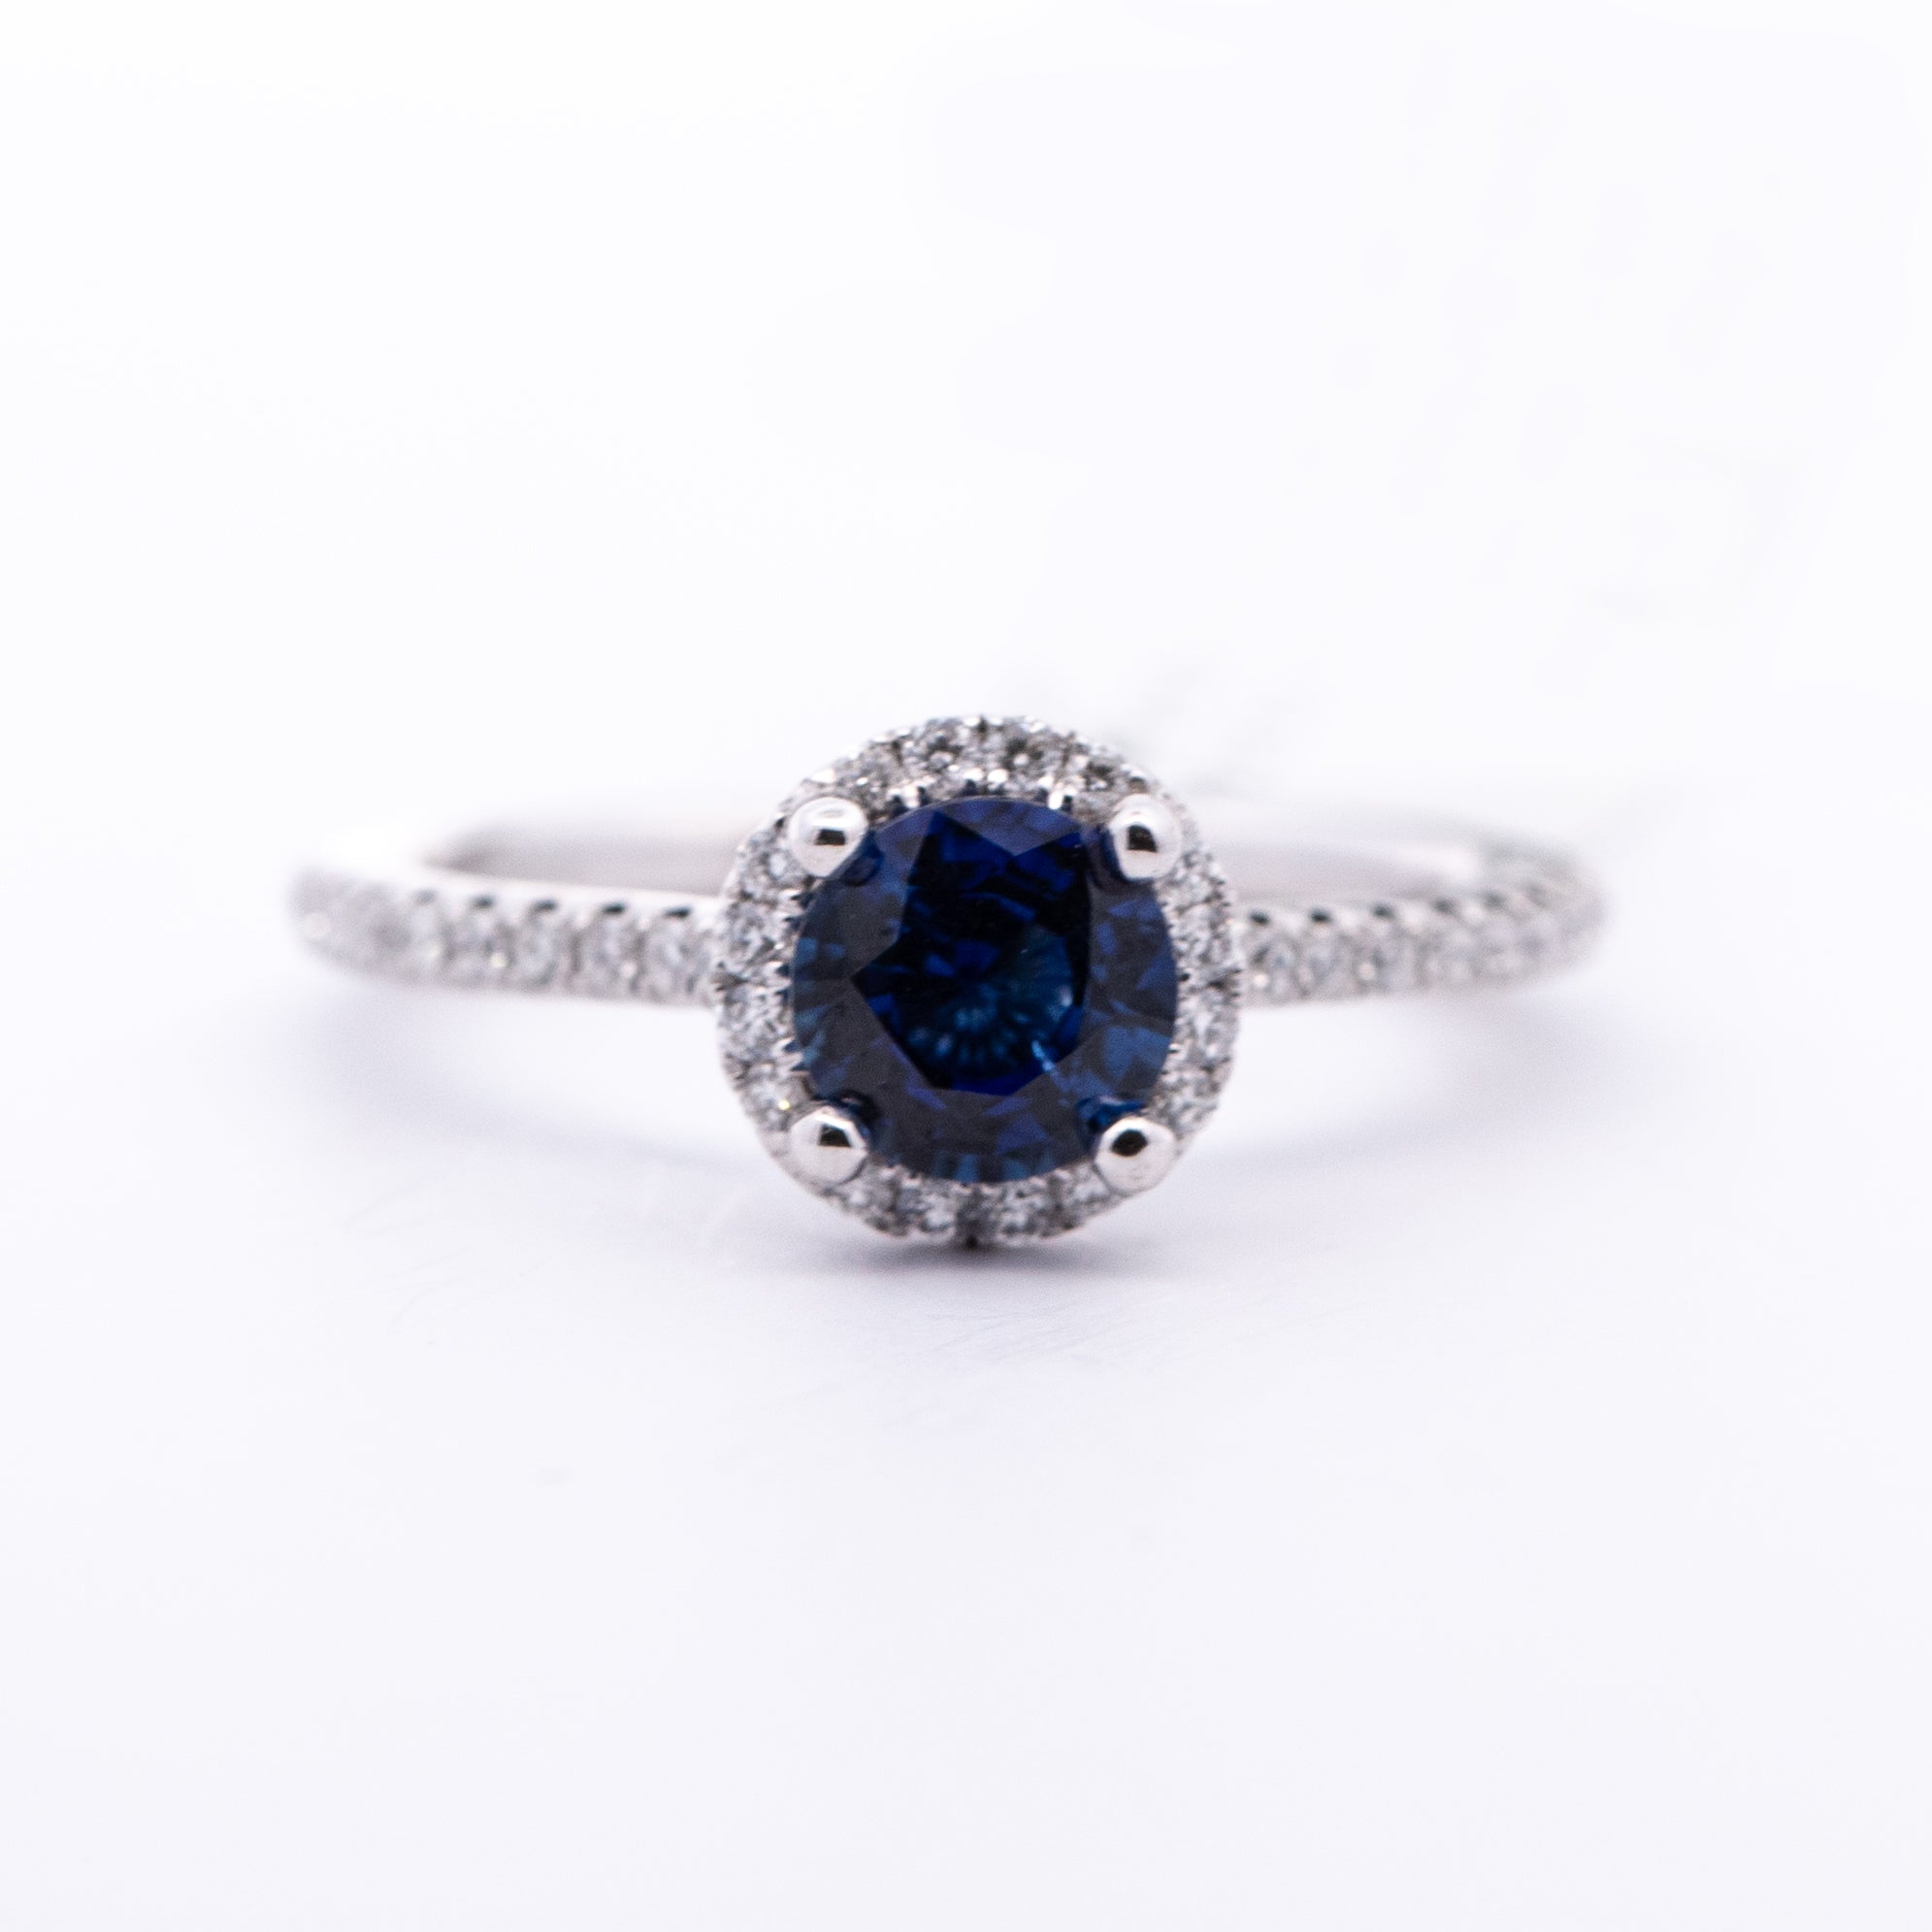 Style: Classic Description: Fashion Ring - Colored Stone Rings - Womens